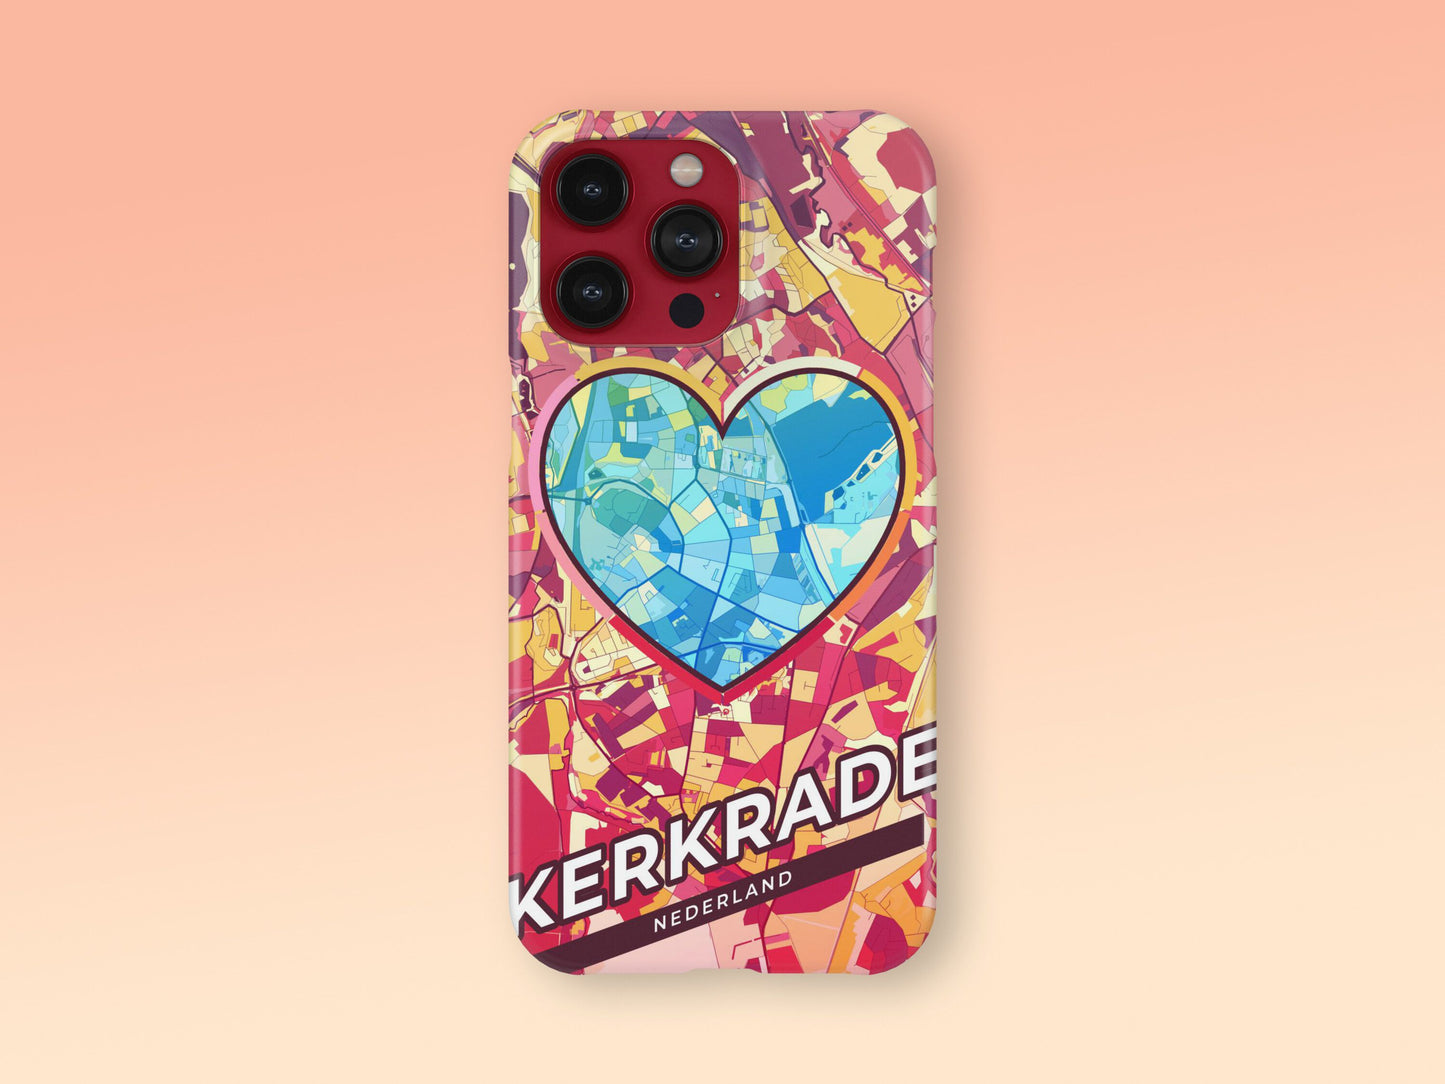 Kerkrade Netherlands slim phone case with colorful icon. Birthday, wedding or housewarming gift. Couple match cases. 2